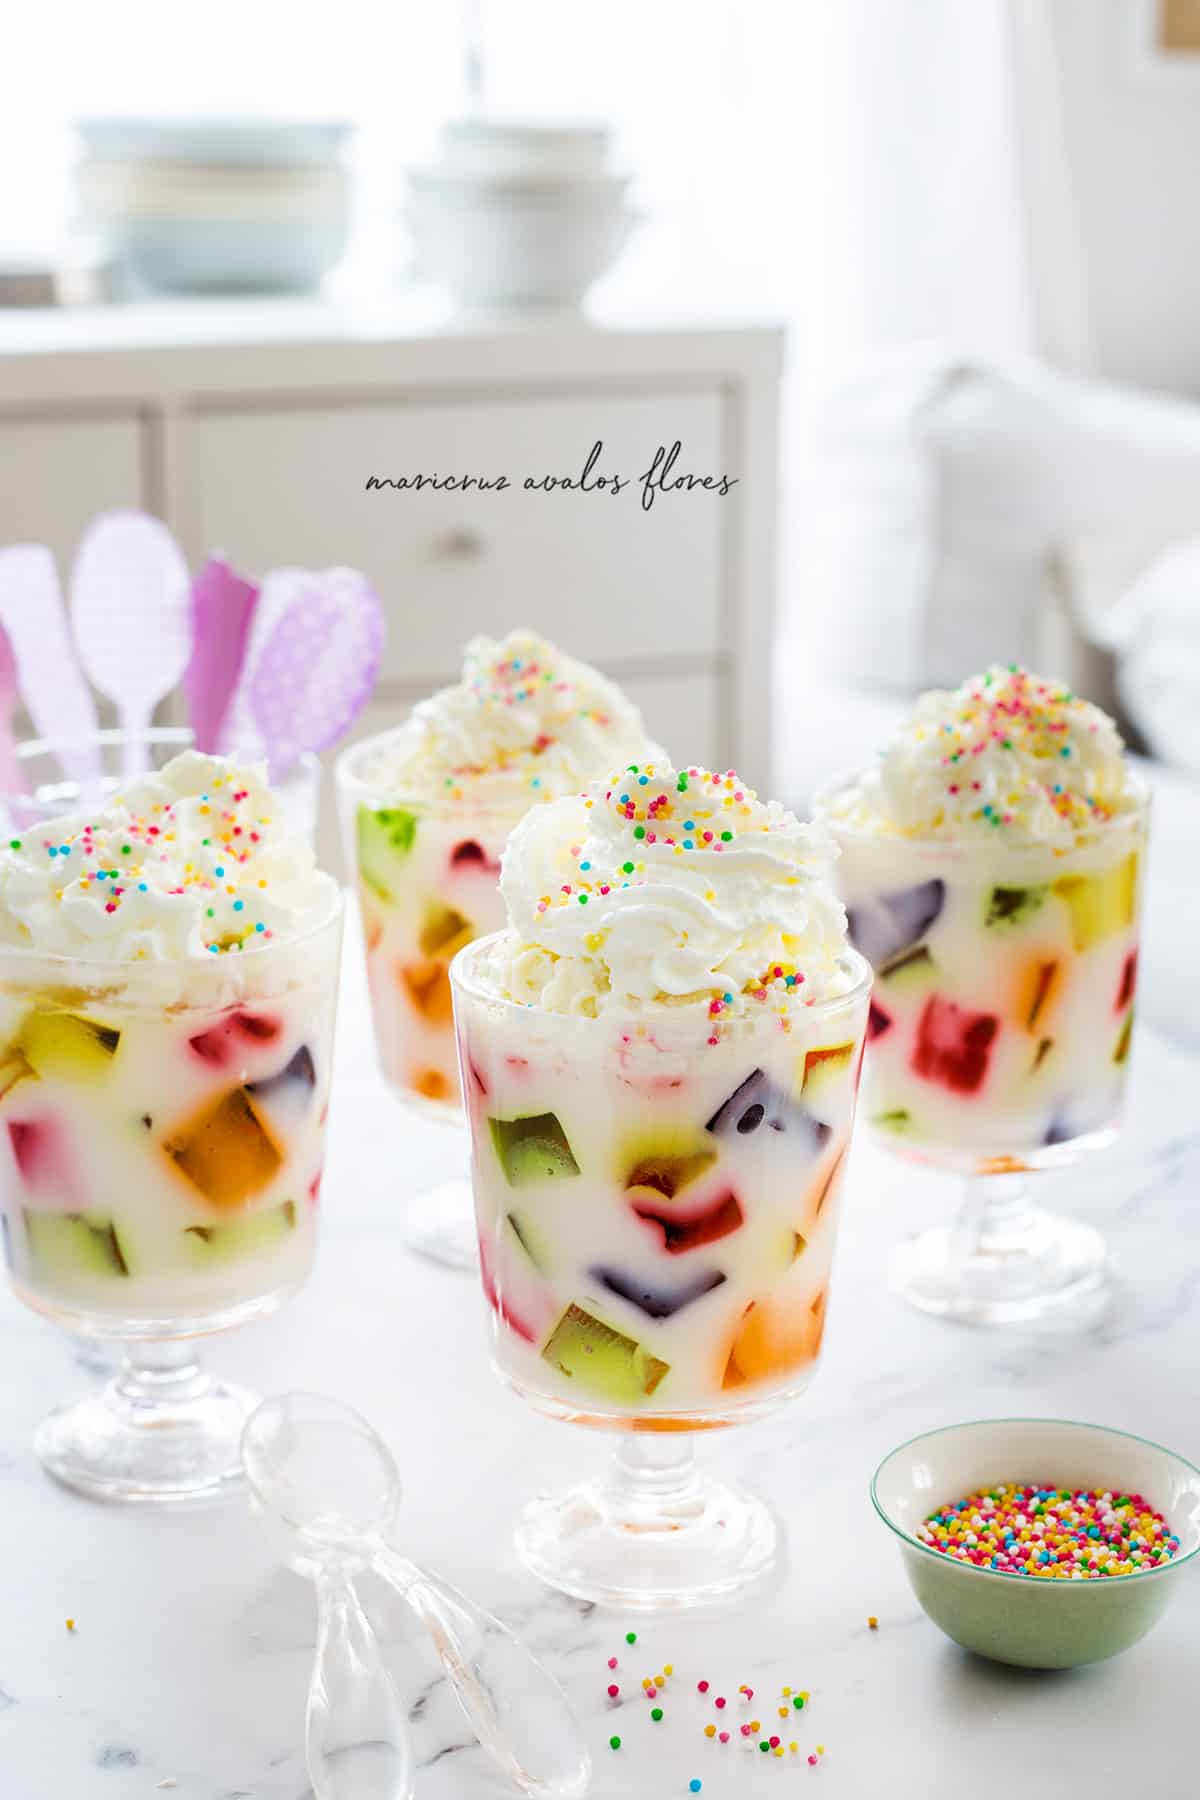 Mexican mosaic jello, gelatina de mosaico, in cups and garnished with whipping cream and colorful sprinkles.